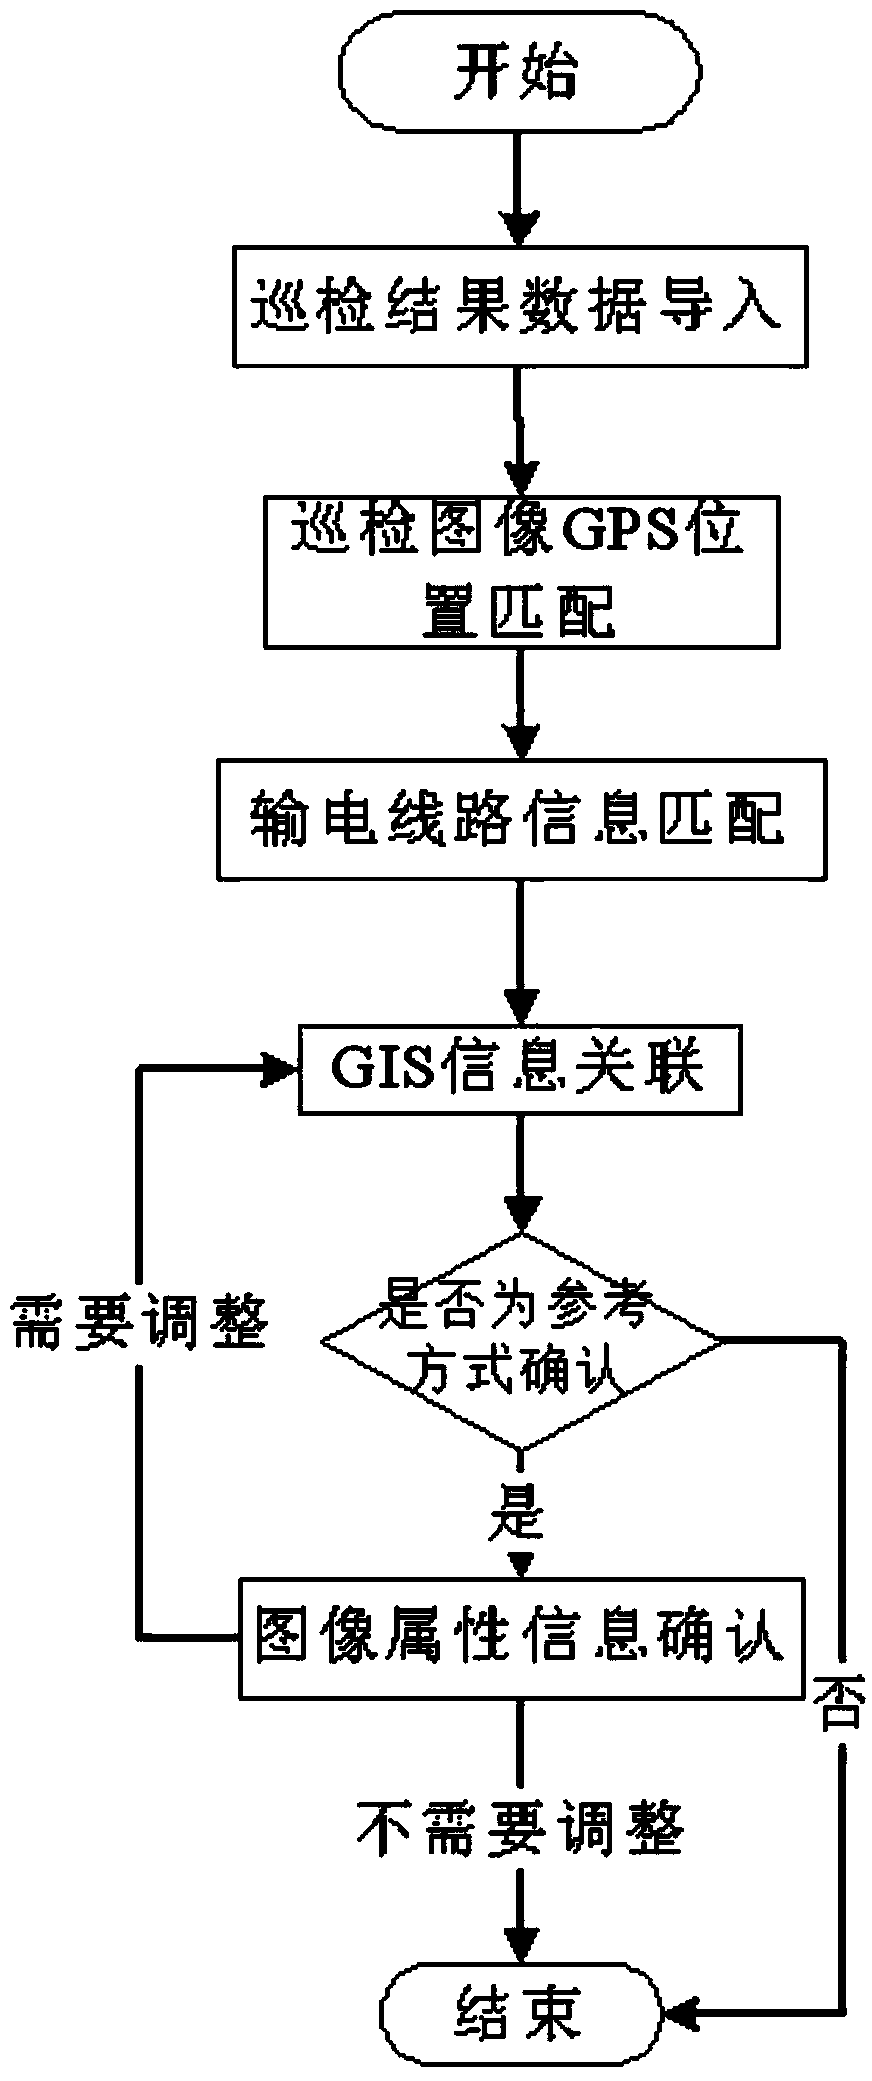 Unmanned aerial vehicle routing inspection image retrieval system and method based on electric transmission line and GIS